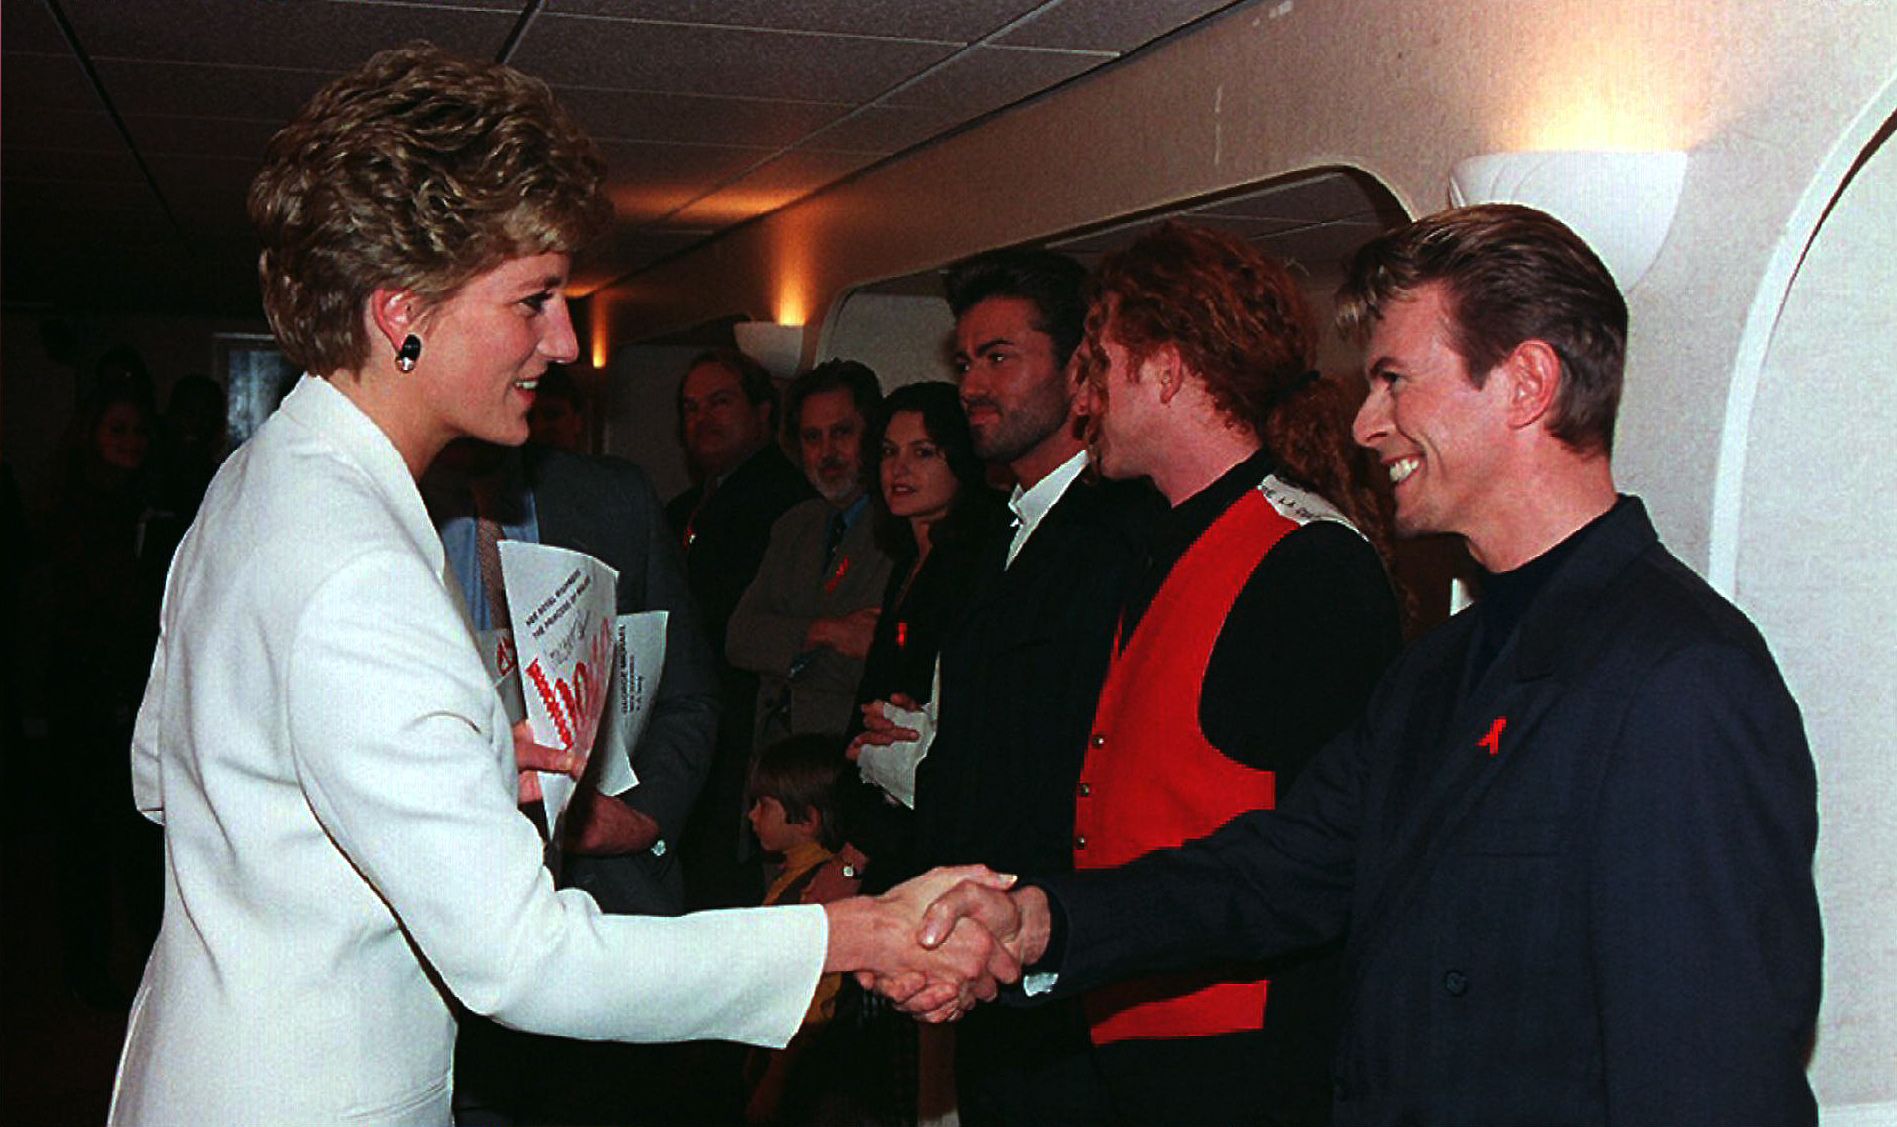 Princes Diana, Patron of the National AIDS Trust, greets singer David Bowie R backstage at Wembley Arena in London